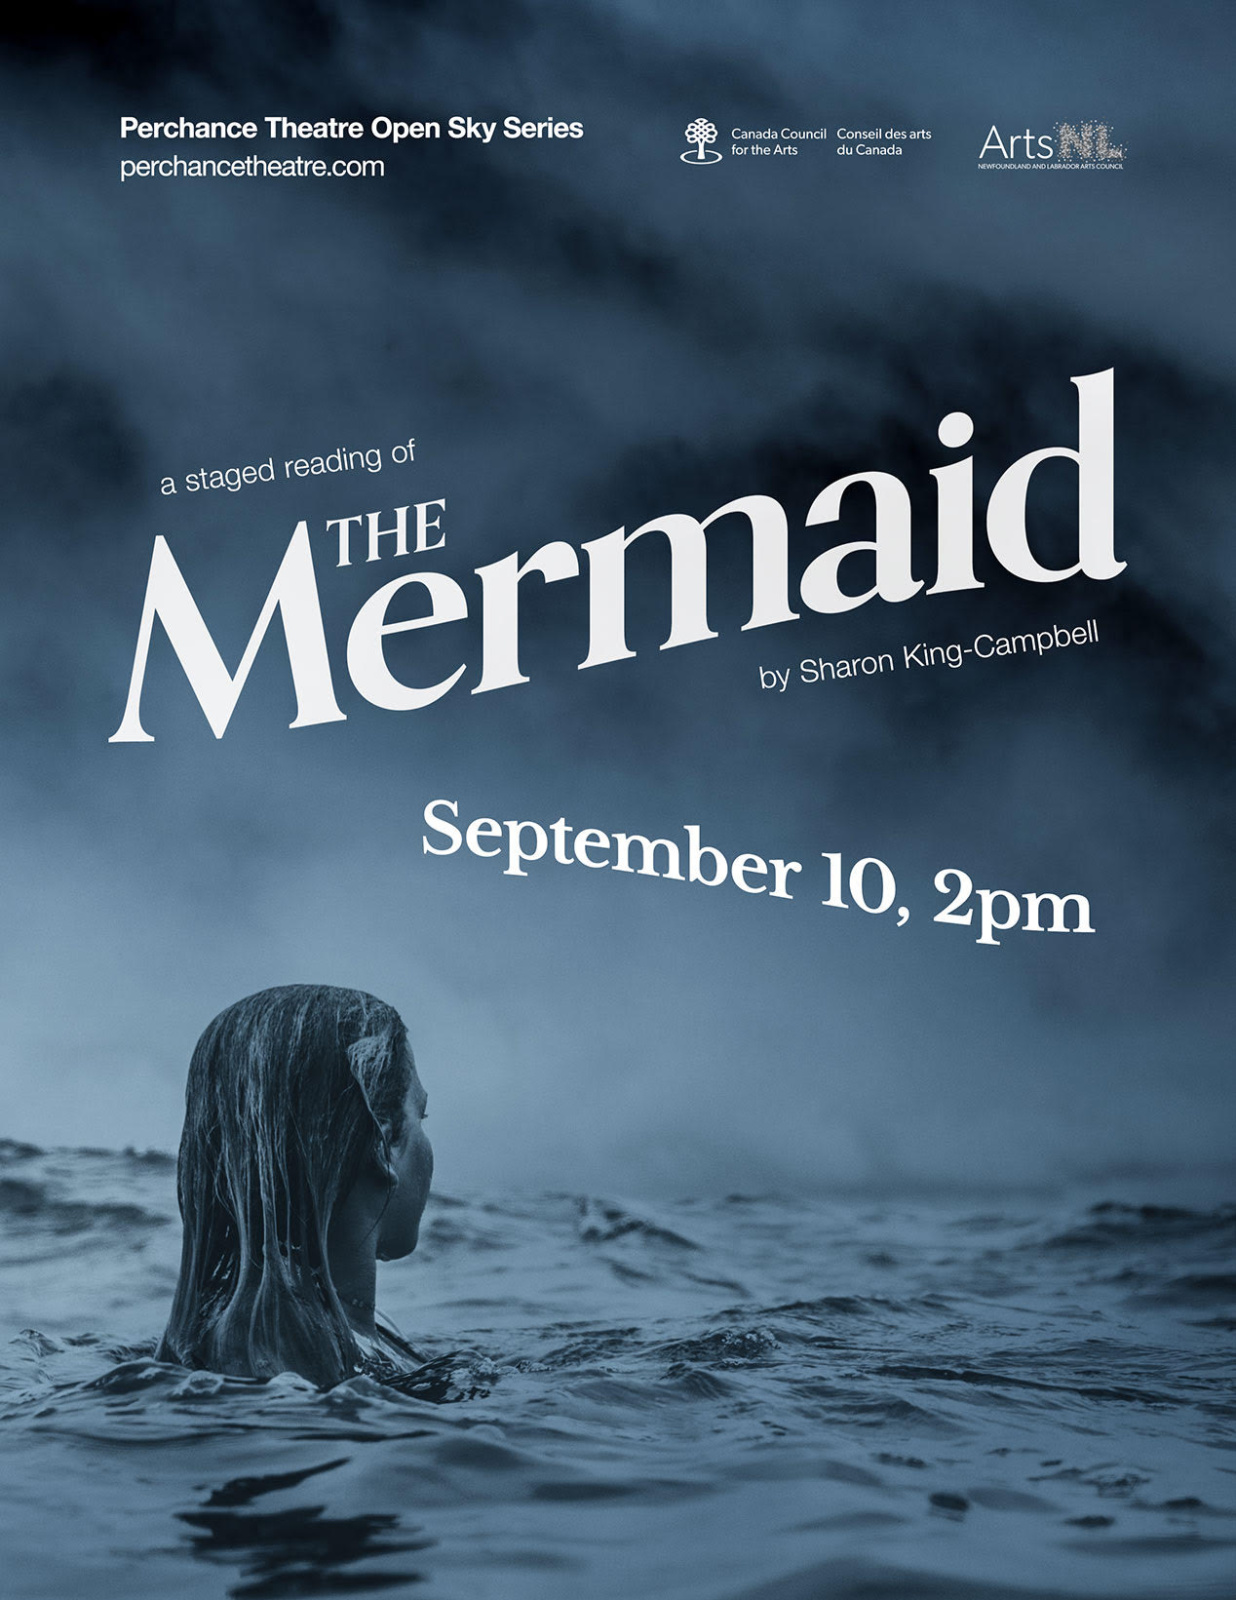 The poster for "The Mermaid." A woman's and neck protrude from the ocean, facing away from us. The cloudy sky, the ocean's surface, and the woman are all in shades of blue. Text reads: Perchance Theatre Open Sky Series; perchancetheatre.com; a staged reading of The Mermaid by Sharon King-Campbell; September 10, 2pm.